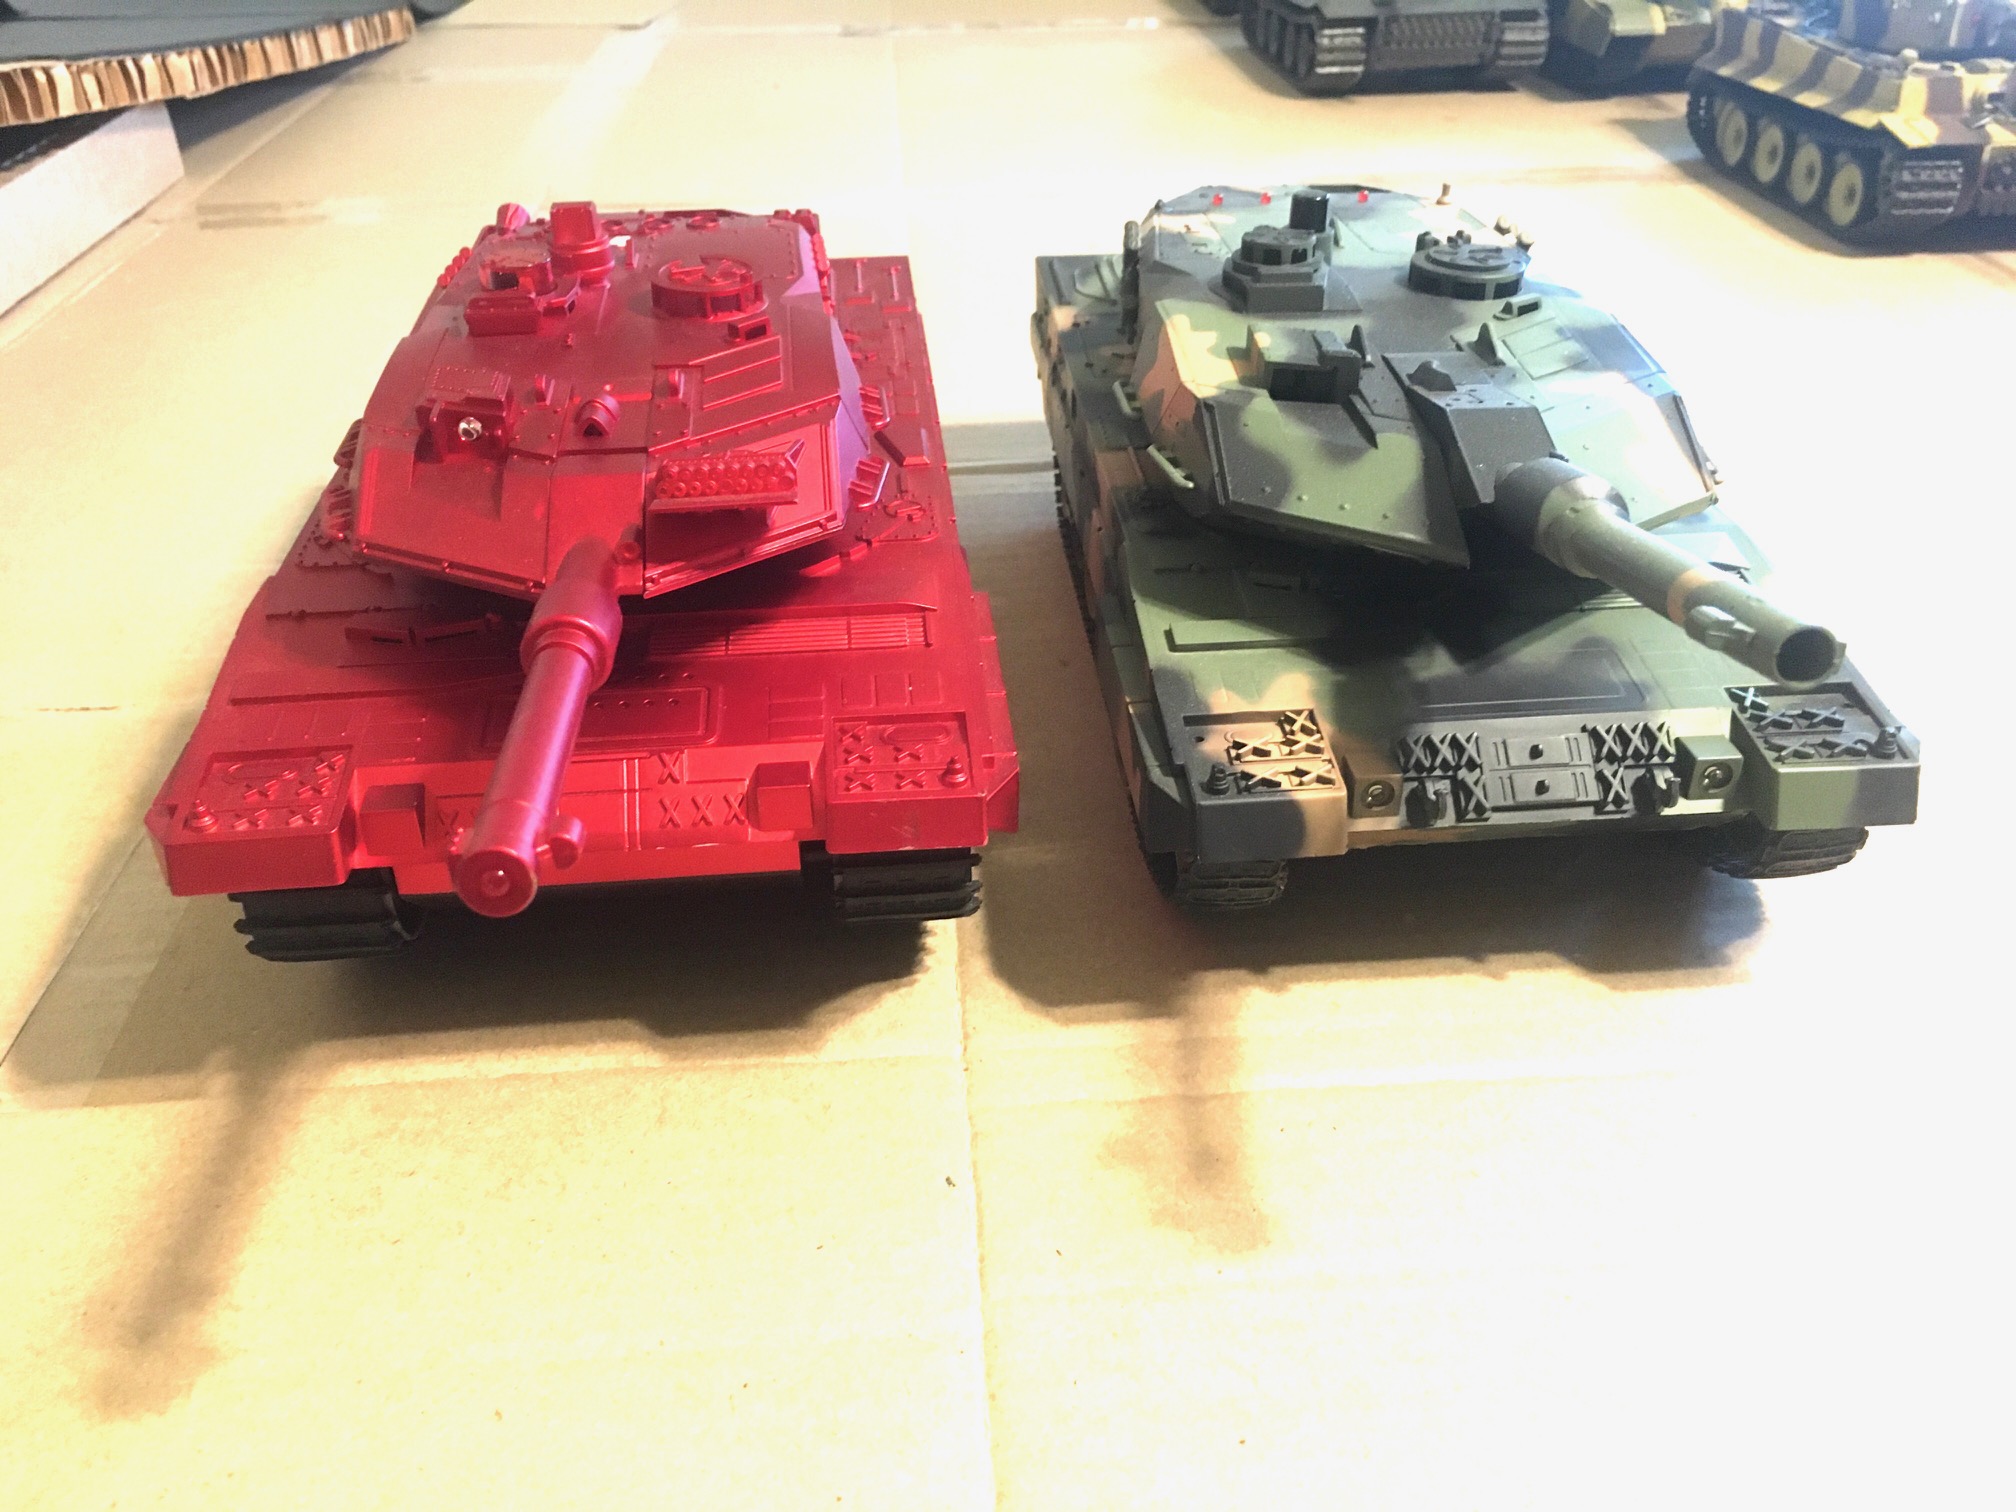 Red Panzer next to a HL 1/24 Leopard. Looks similar to me.